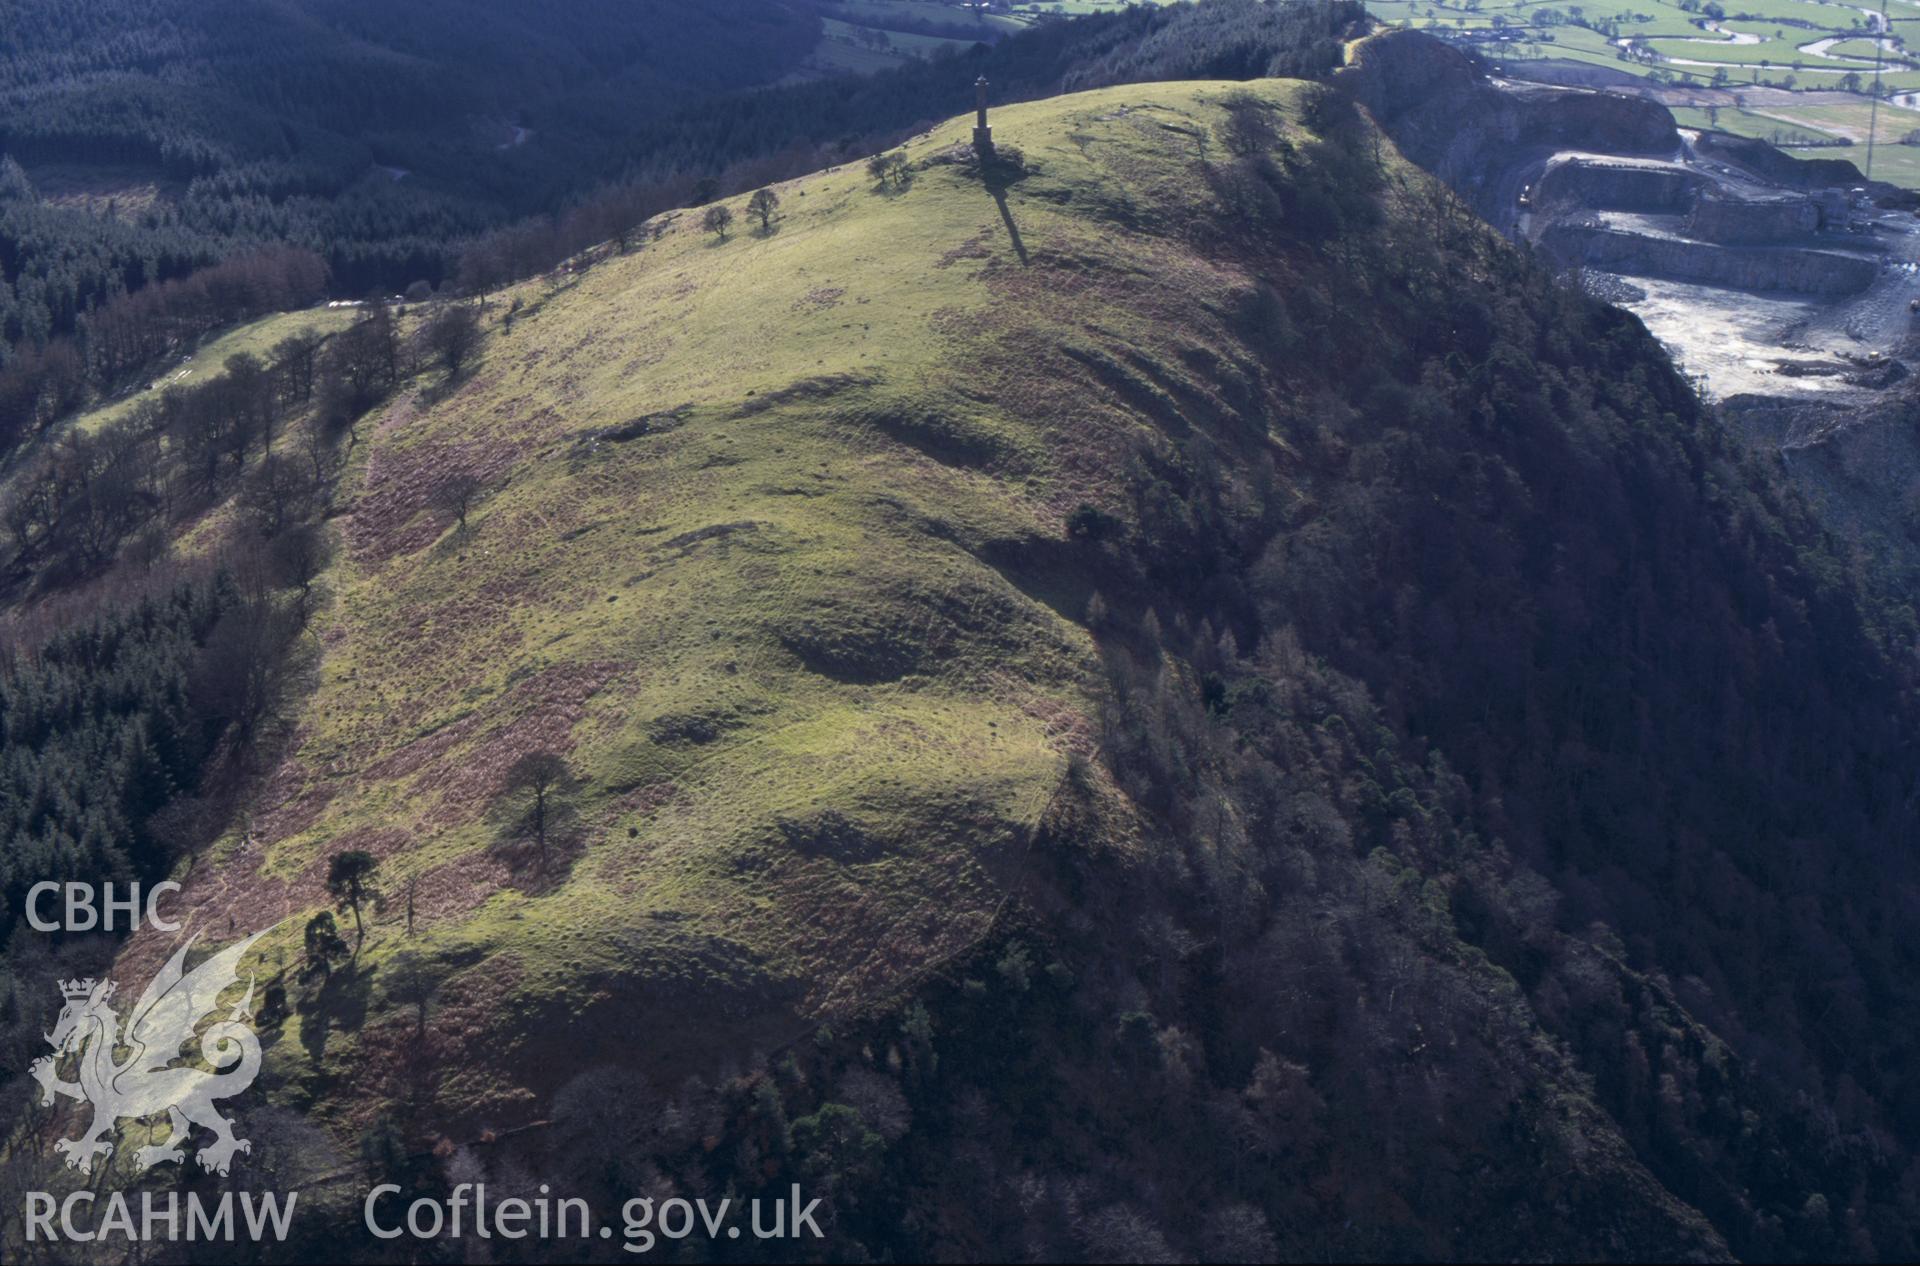 RCAHMW colour oblique aerial photograph of the Breiddin Hillfort taken on 26/02/1995 by C.R. Musson